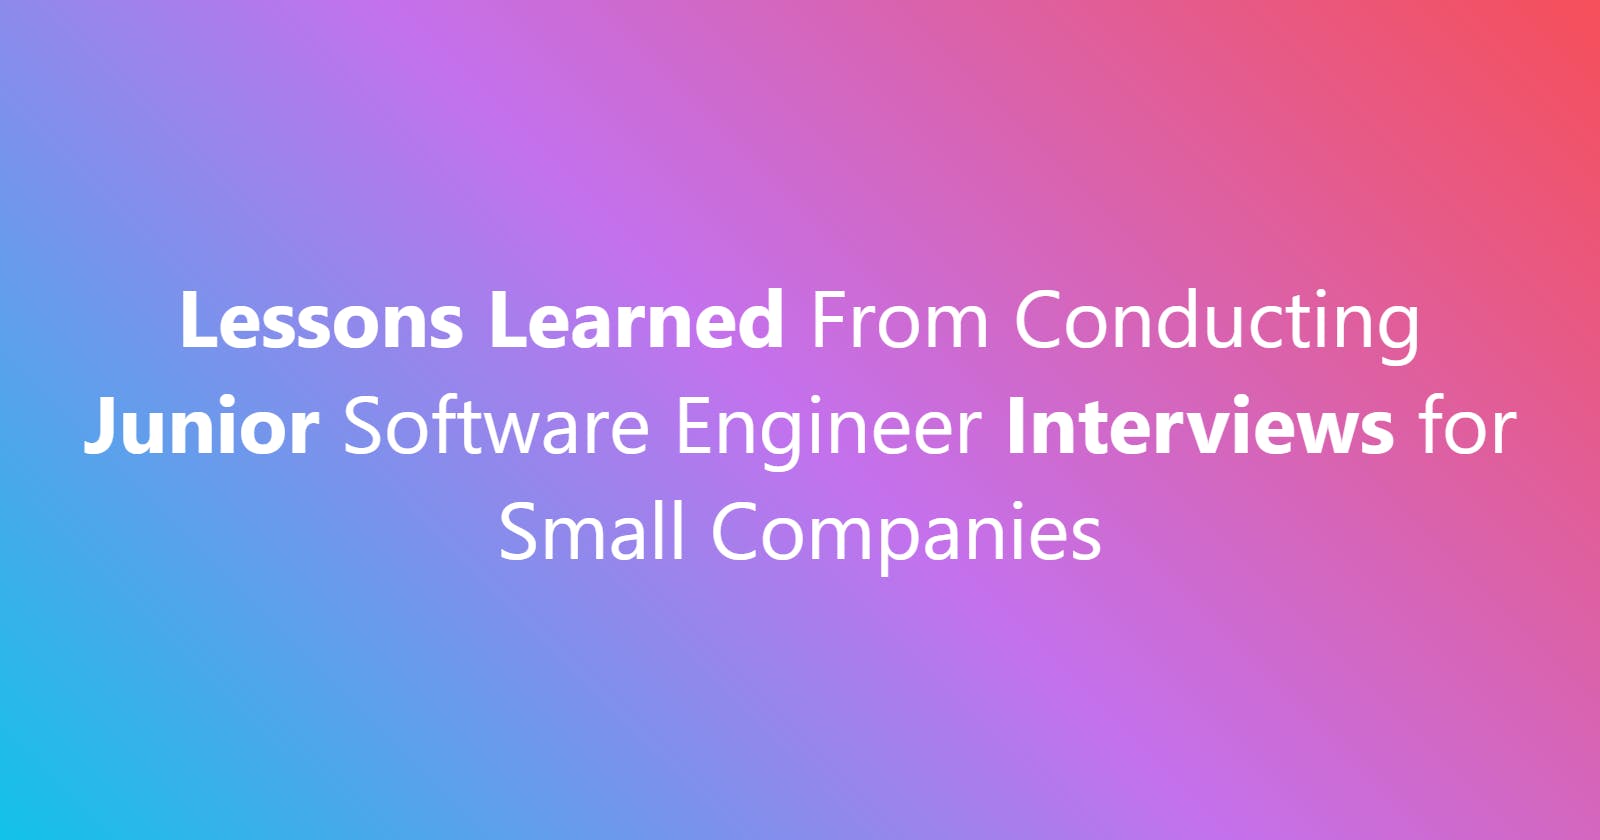 Lessons Learned From Conducting Junior Software Engineer Interviews for Small Companies